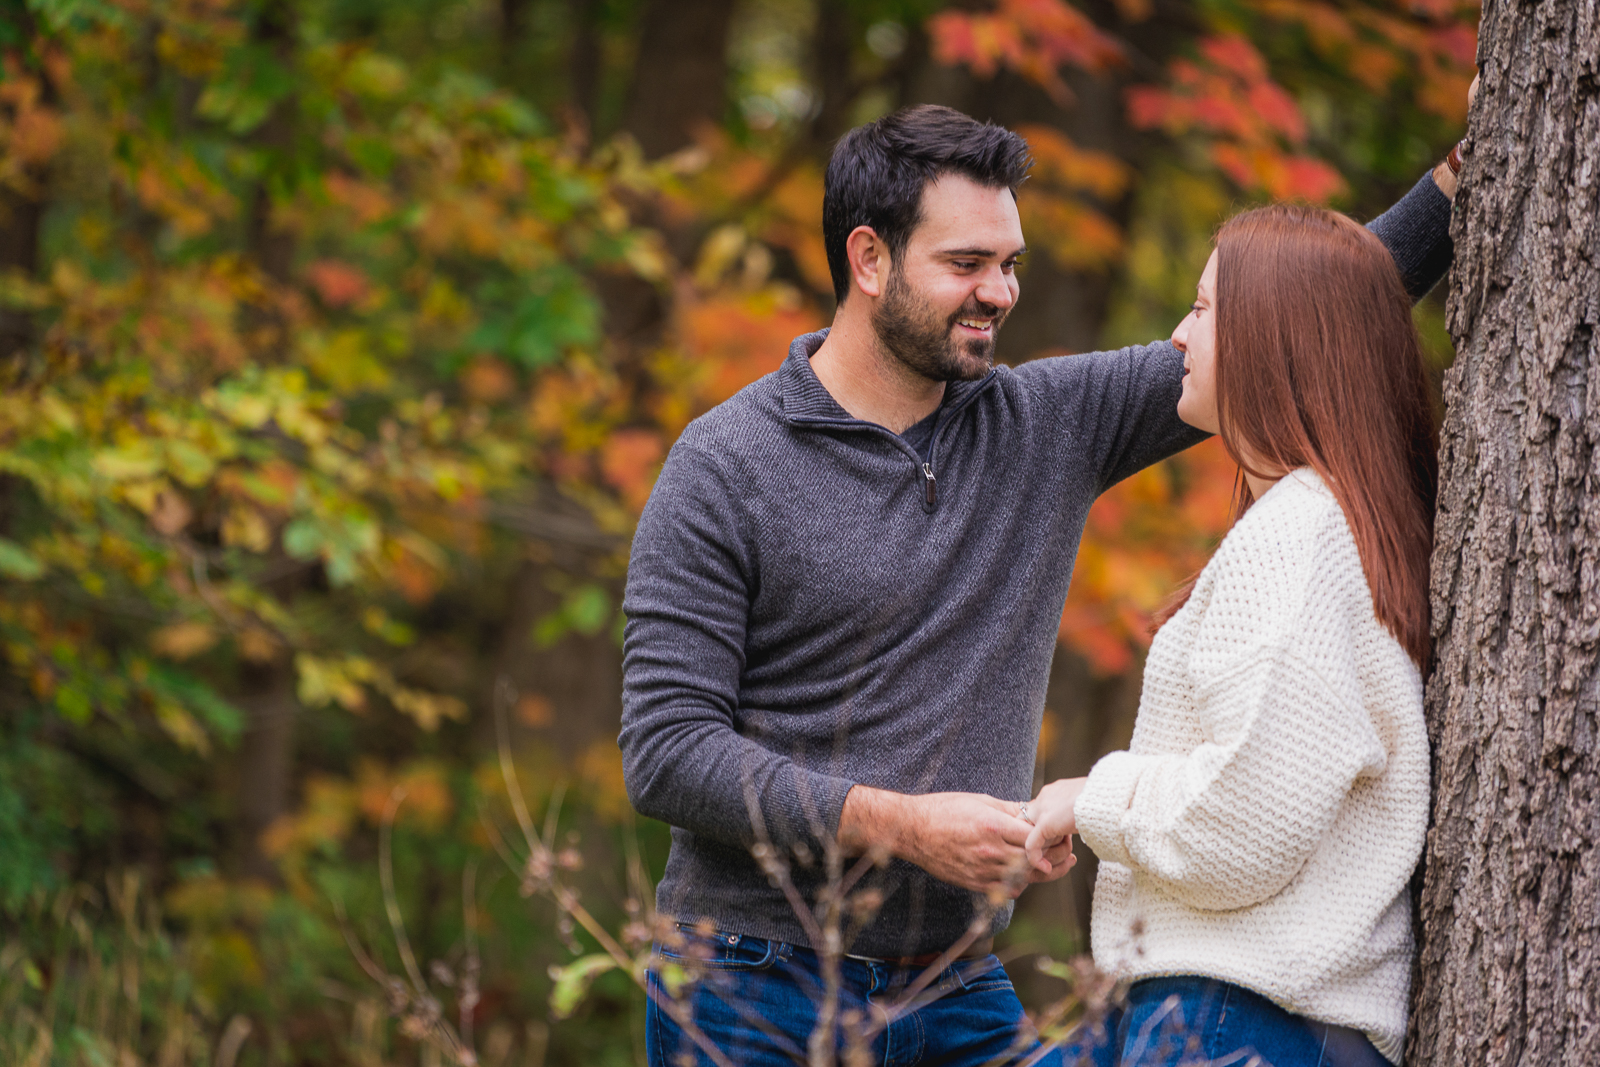 Man and woman fiancee engagement photo, couple portrait, fall leaves, fall colors, cute, smile, nature, forest, trees, outdoor fall engagement photo session at Tinkers Creek, Bedford Reservation, Cleveland Metroparks